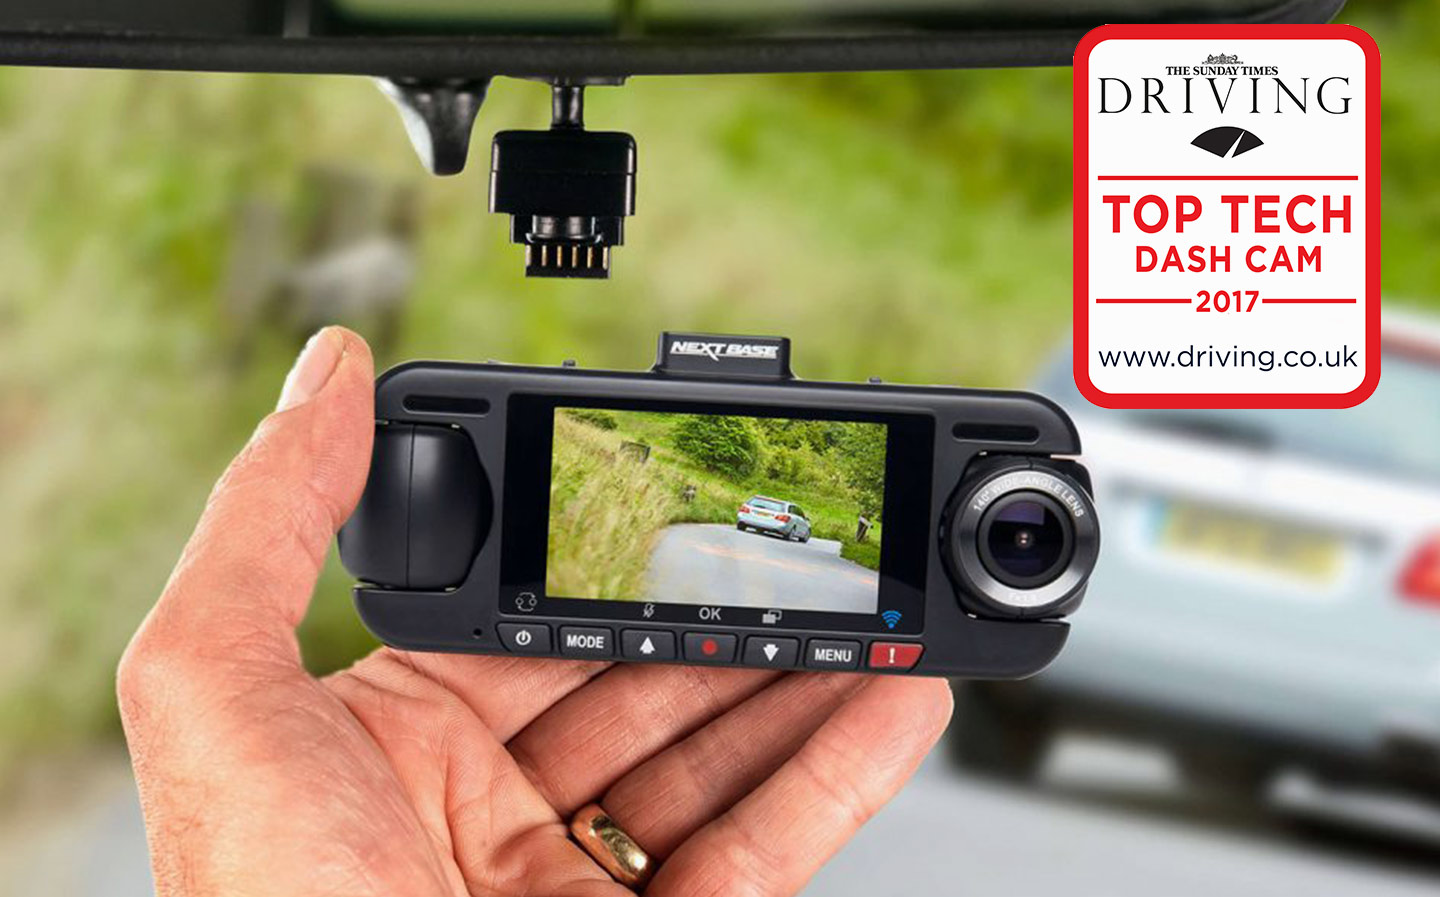 Nextbase Duo HD is Sunday Times Driving's Top Tech Dash Cam 2017 - best dash cams of the year.